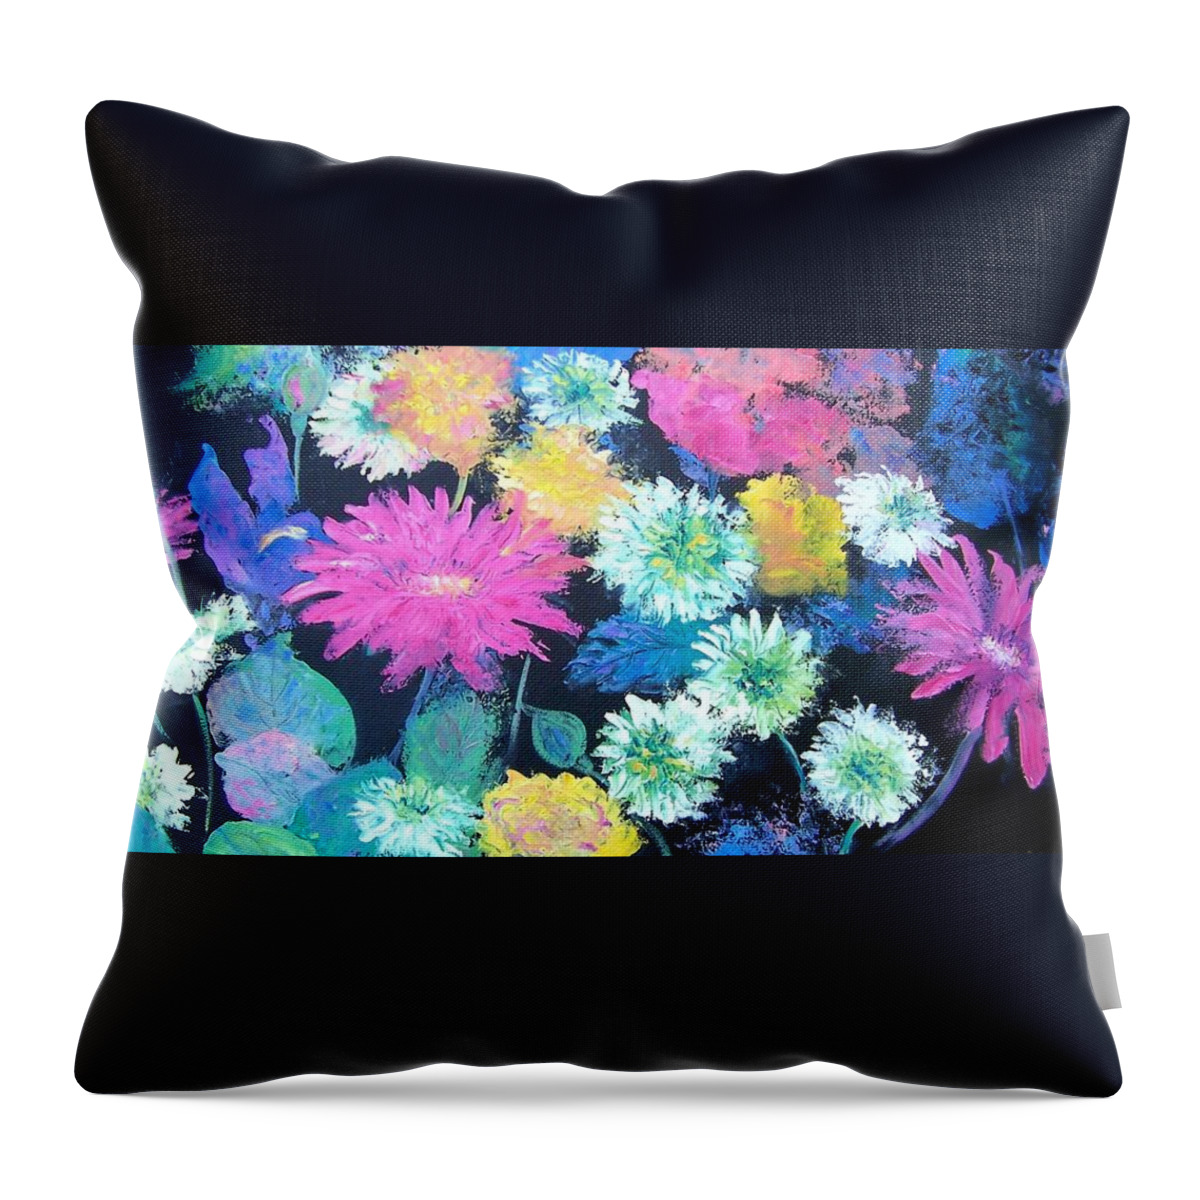 Flowers Throw Pillow featuring the painting Spring Flowers by Jan Matson